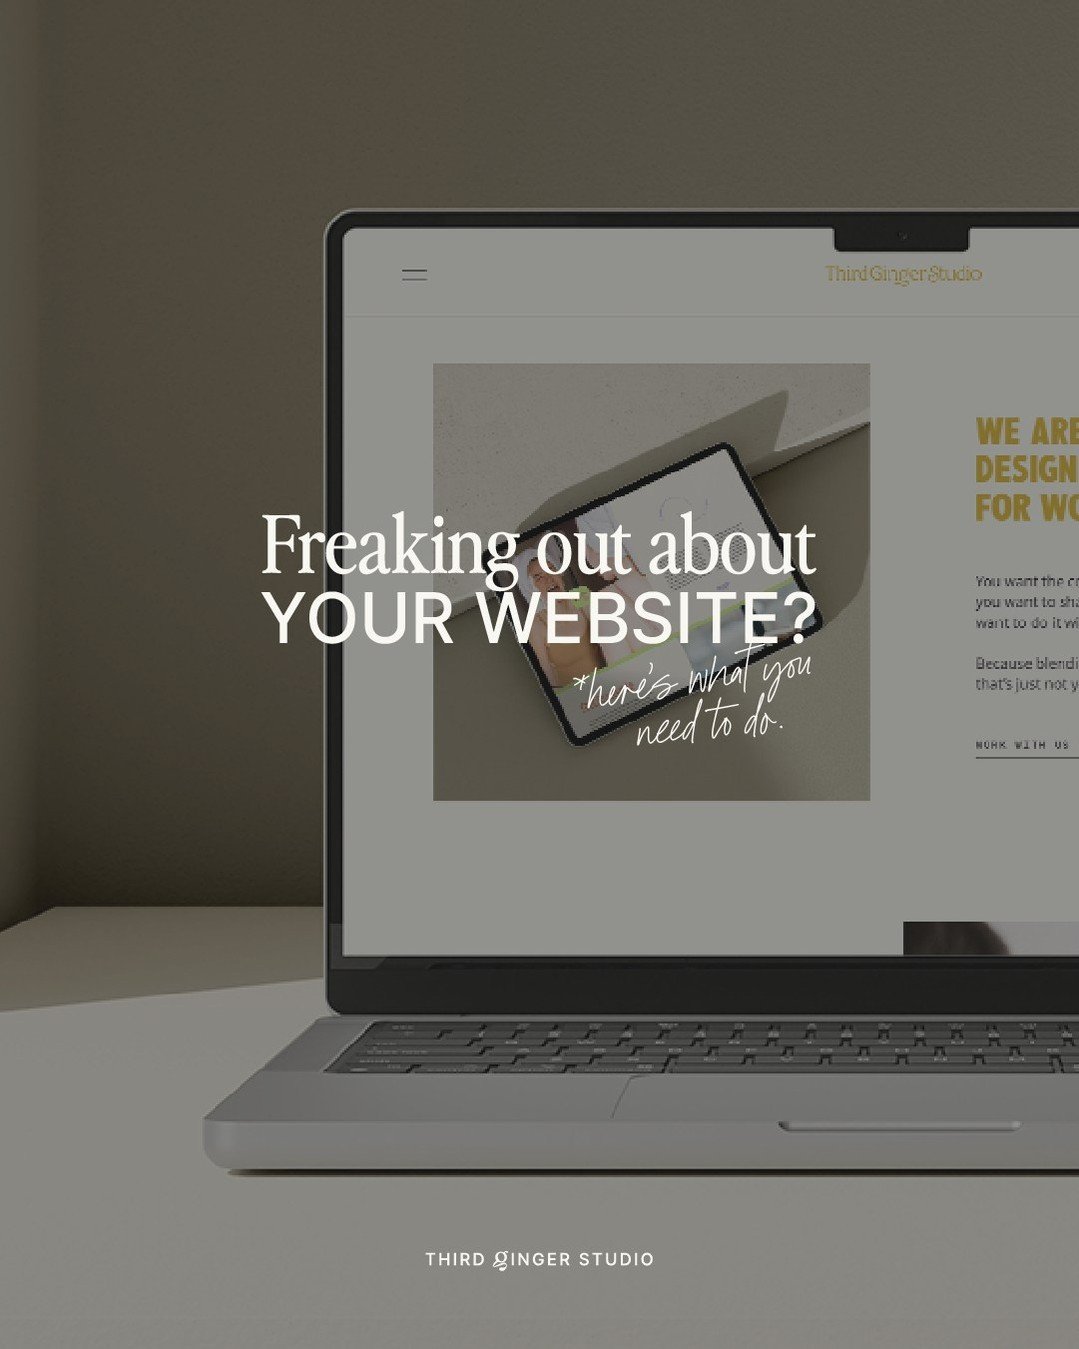 Freaking out about your website?⁣
⁣
You, along with every other business owner who needs one! Well, I've got the down low, the inside goss, the deets on what you need to know about Squarespace templates before jumping in.⁣
⁣
The basics? A Squarespace